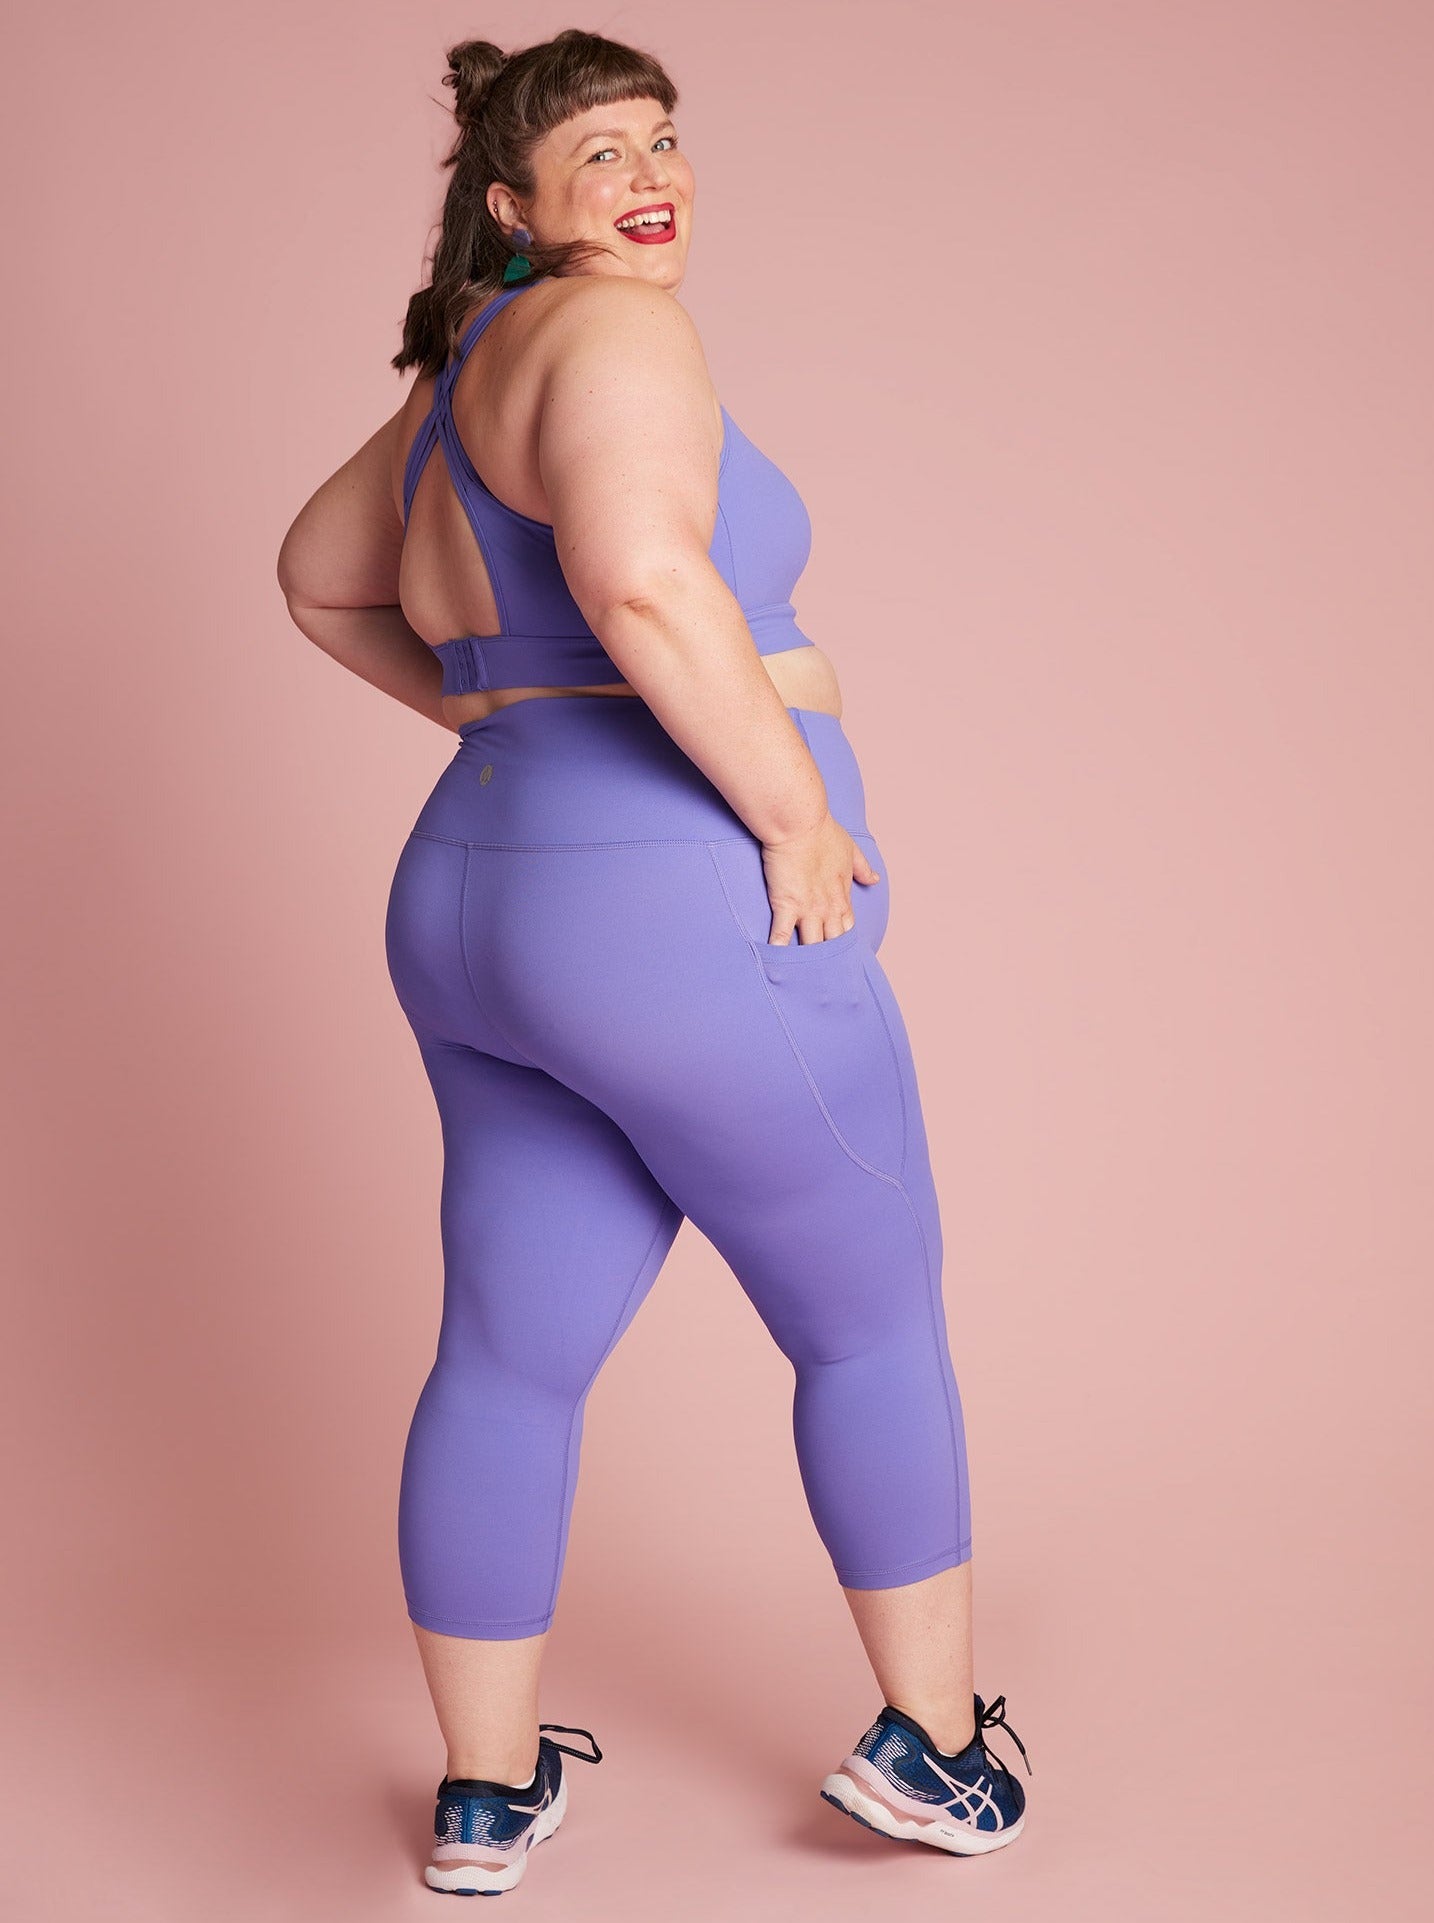 Buy Womens Buttery Ultra Soft Premium Solid Color Leggings One Size and  Plus Size FREE SHIPPING Online in India 